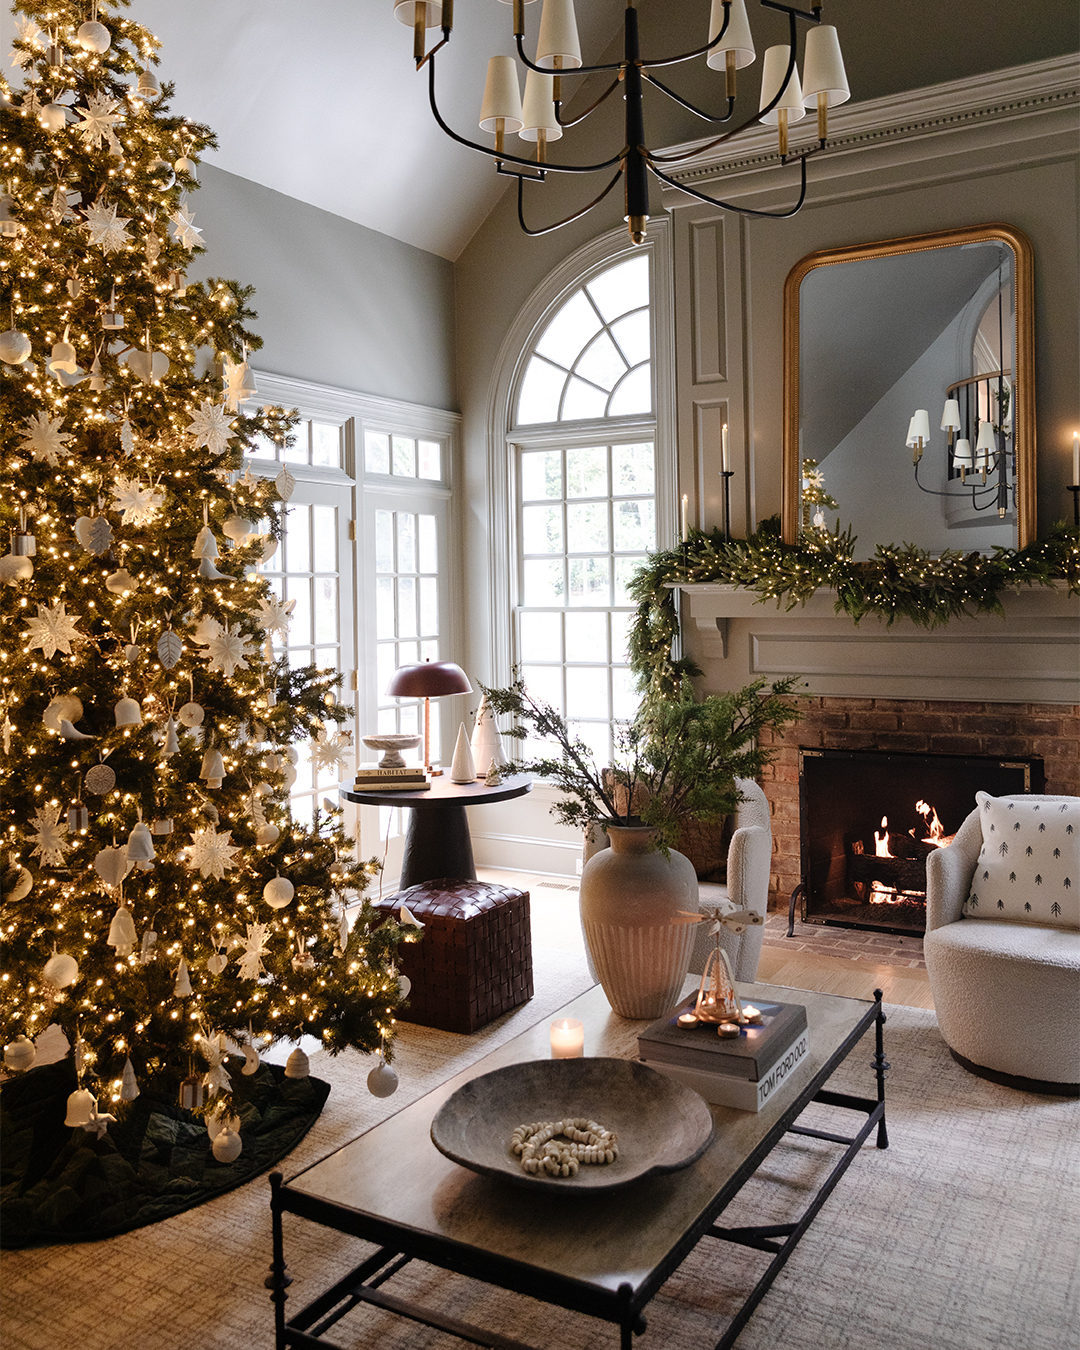 Crate and Barrel; Shop now for the perfect themed decorations for your home, 12 foot tree, coffee table, rugs and more; Yorkdale 2023; holiday decor ideas 2023